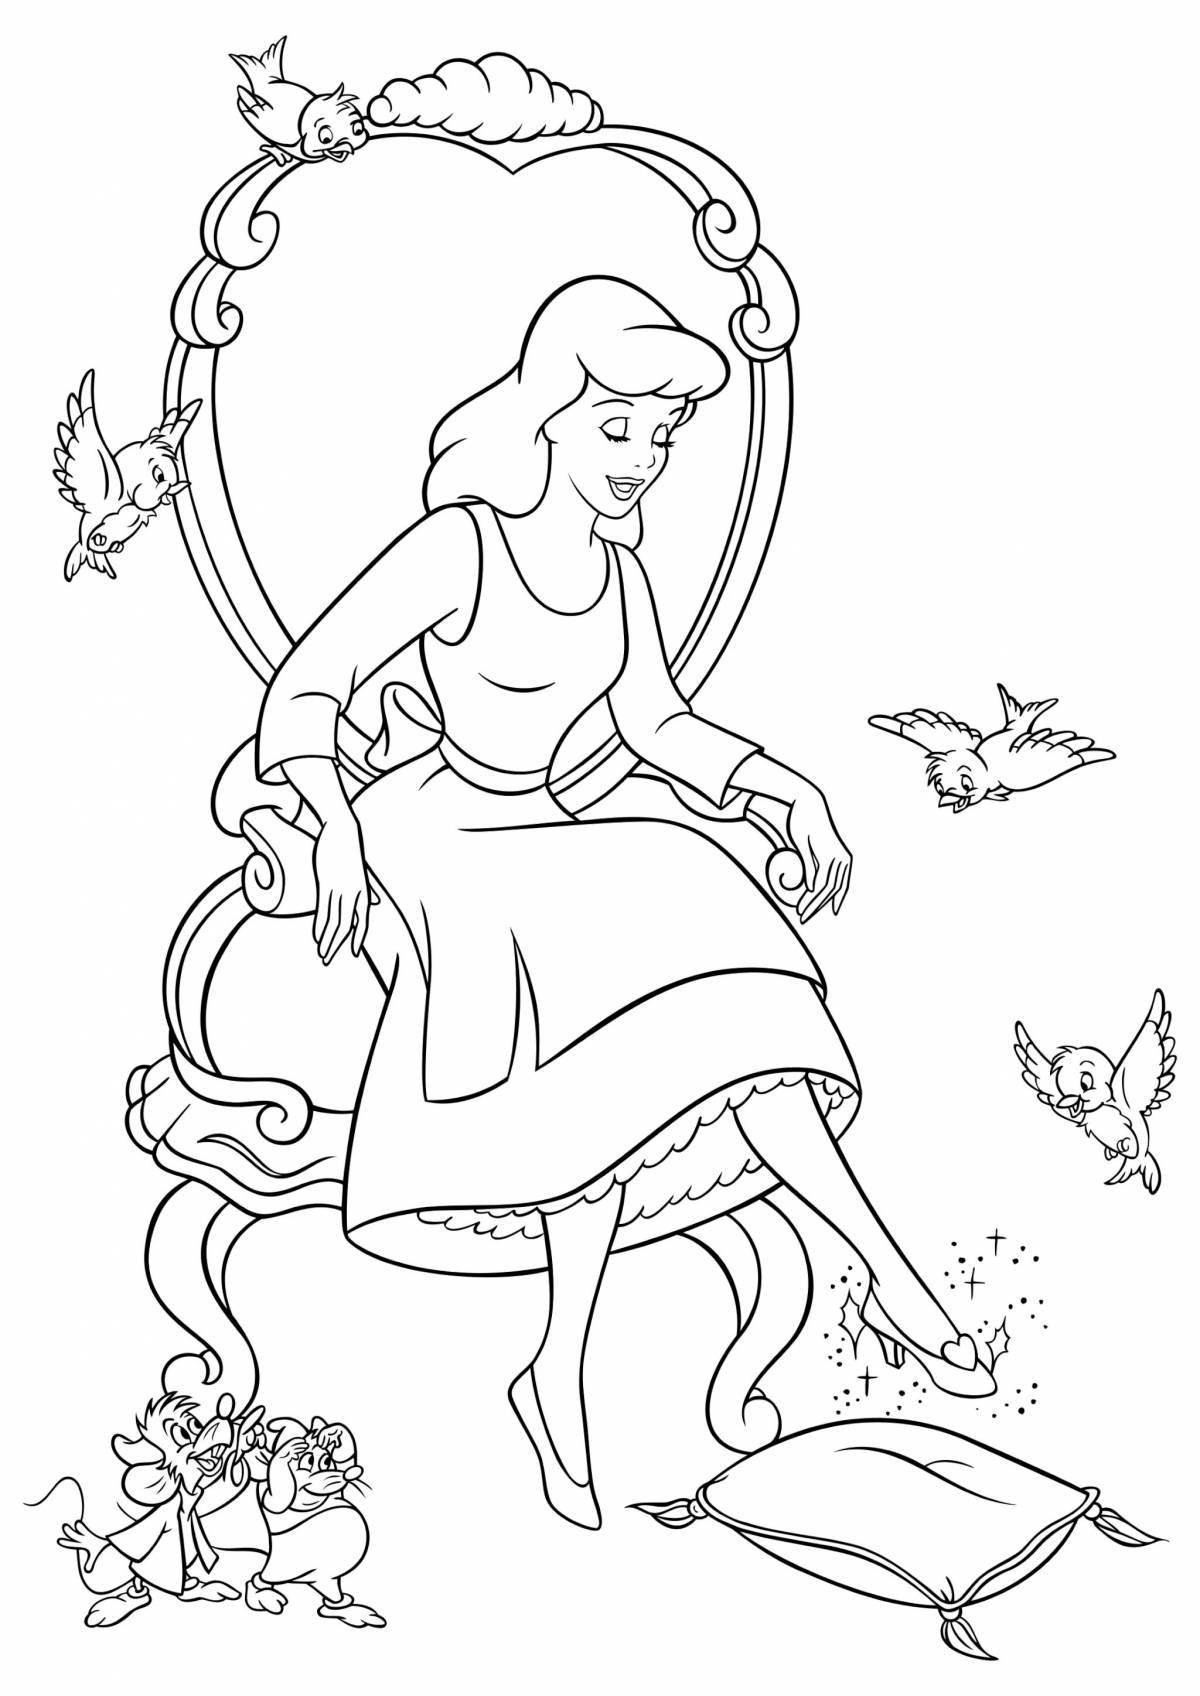 Coloring page divine cinderella and charles perrault